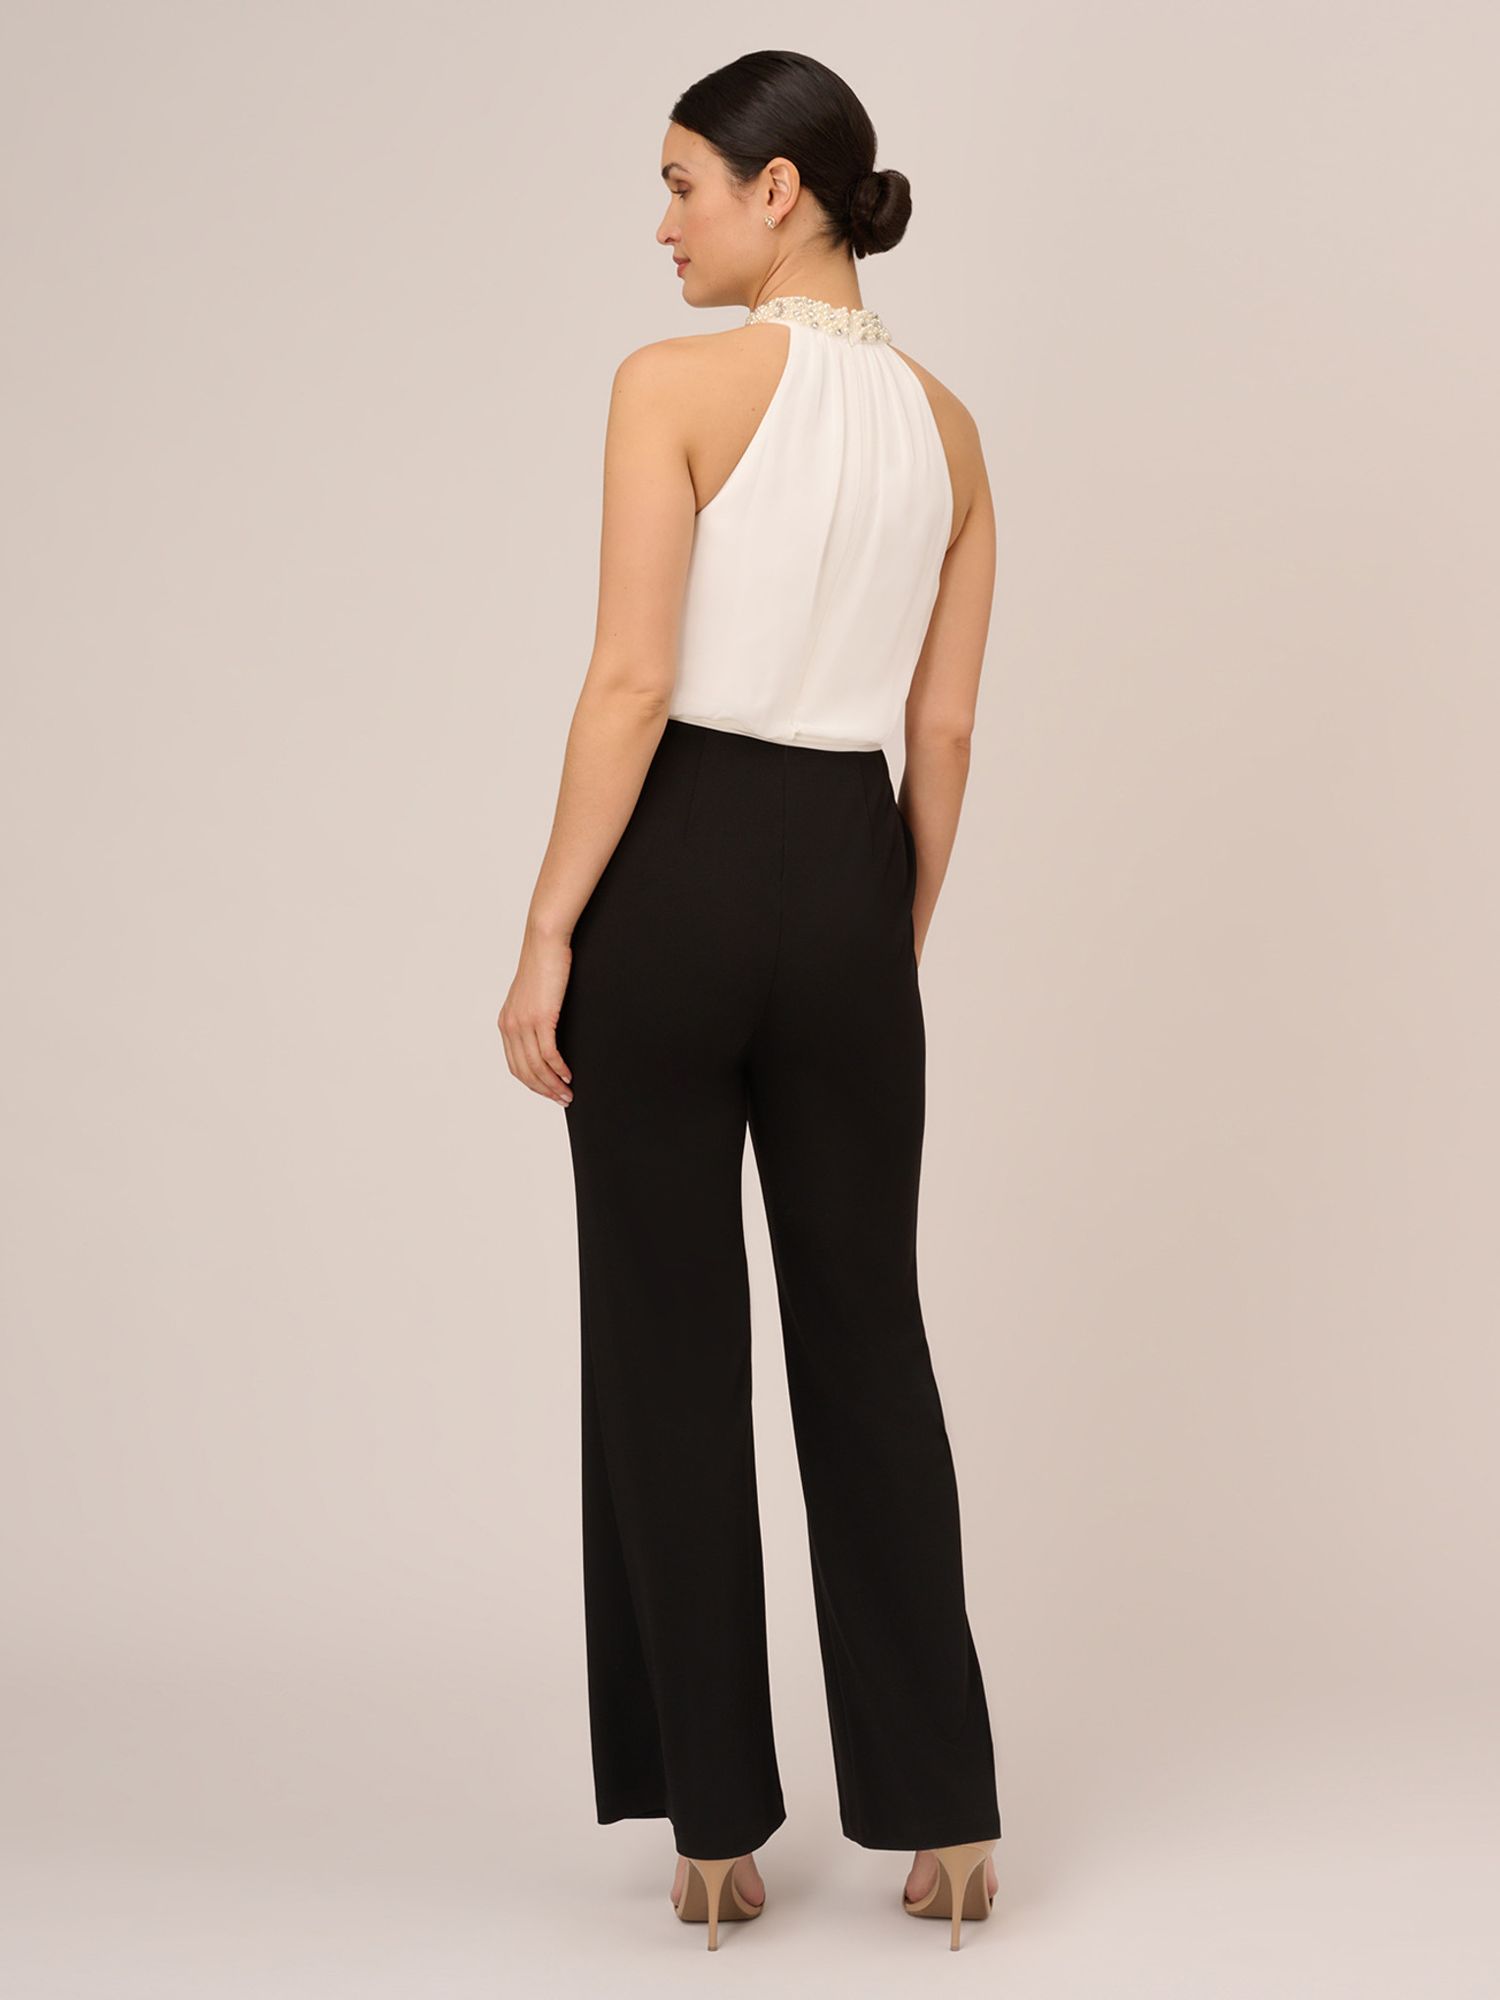 Adrianna Papell Faux Pearl Chiffon Crepe Jumpsuit, Ivory/Black at John ...